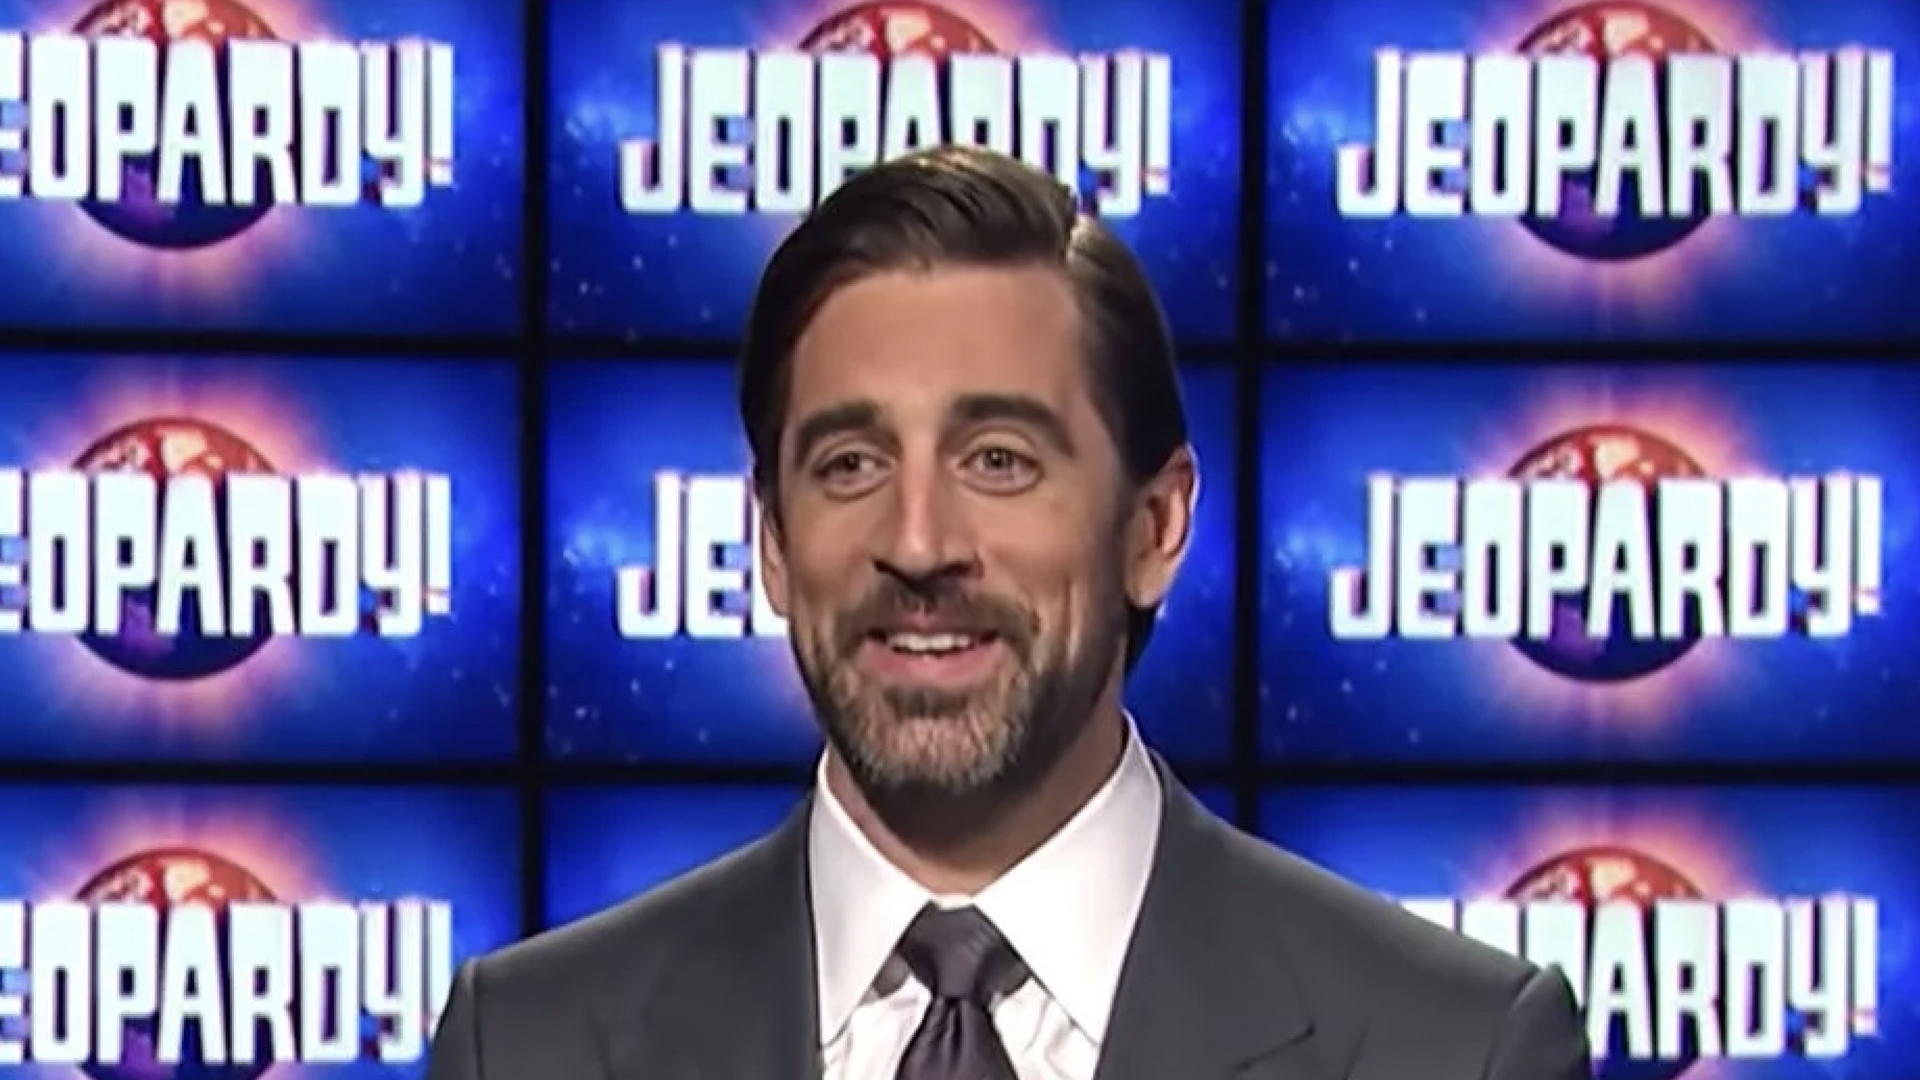 Aaron Rodgers set to dominate as the new Jeopardy! host during NFL retirement after emerging talks